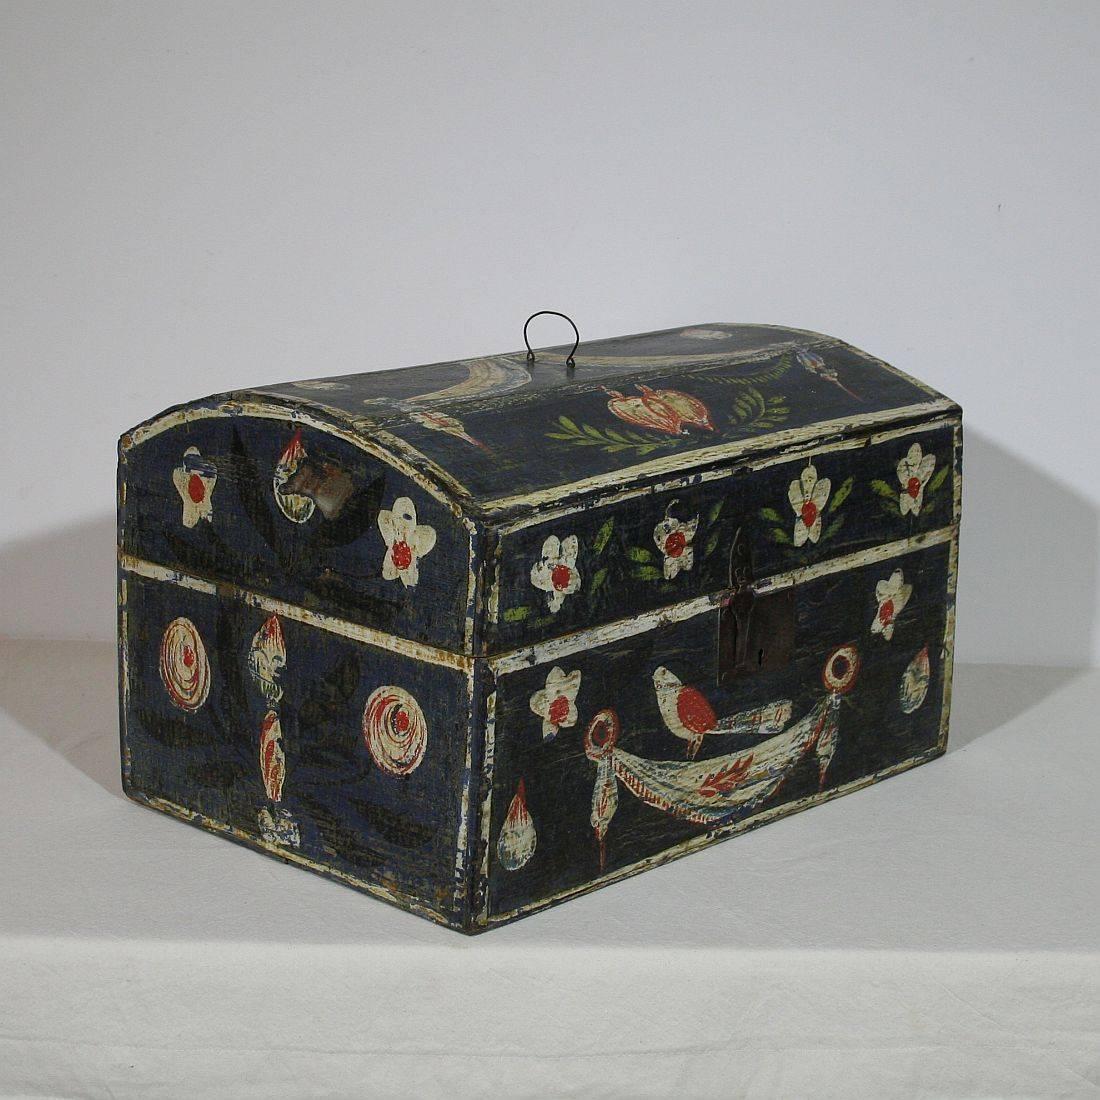 Beautiful painted wooden weddingbox with its original decor and wrought iron lock (no key). Weathered but stunning color. More pictures available.
 